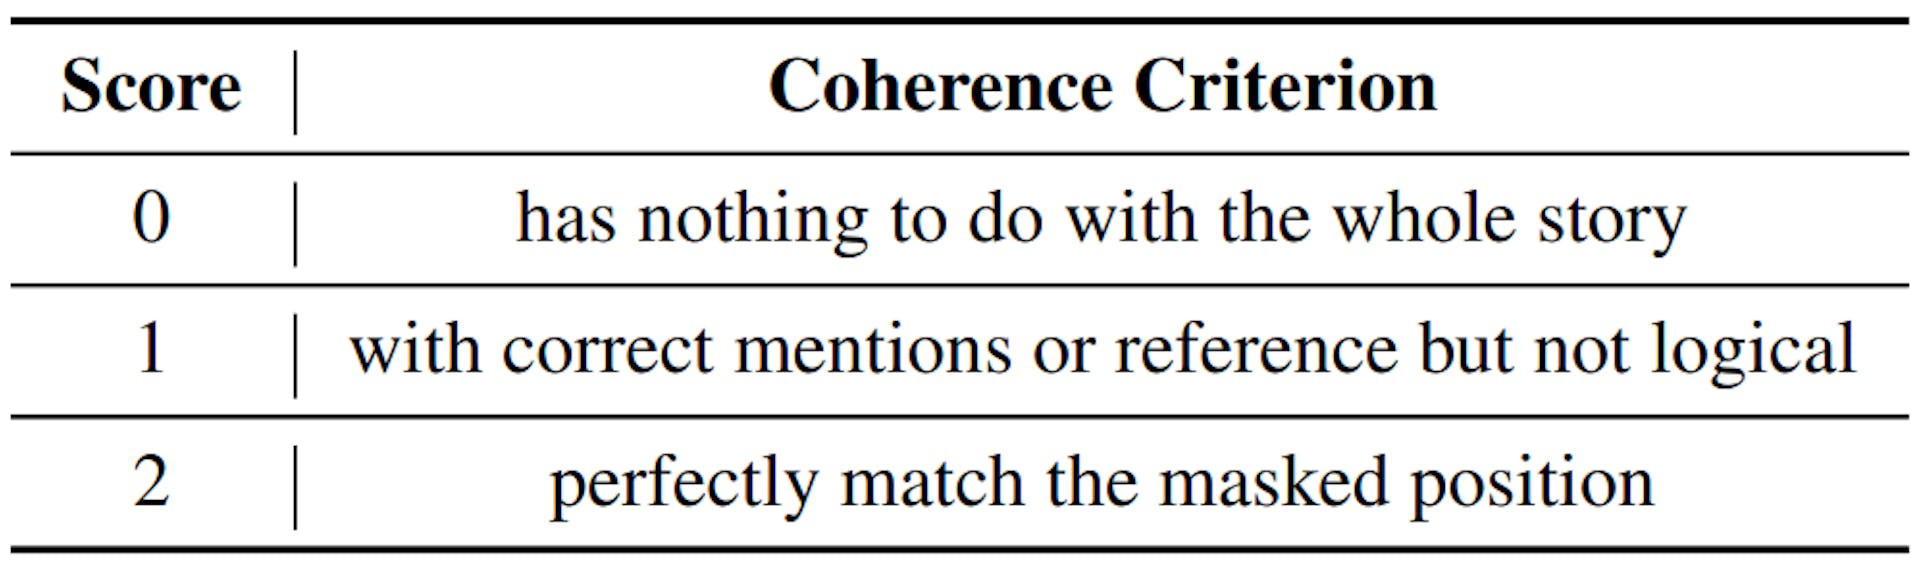 Table 5: Coherence scoring criterion for each generated dialogue turn.